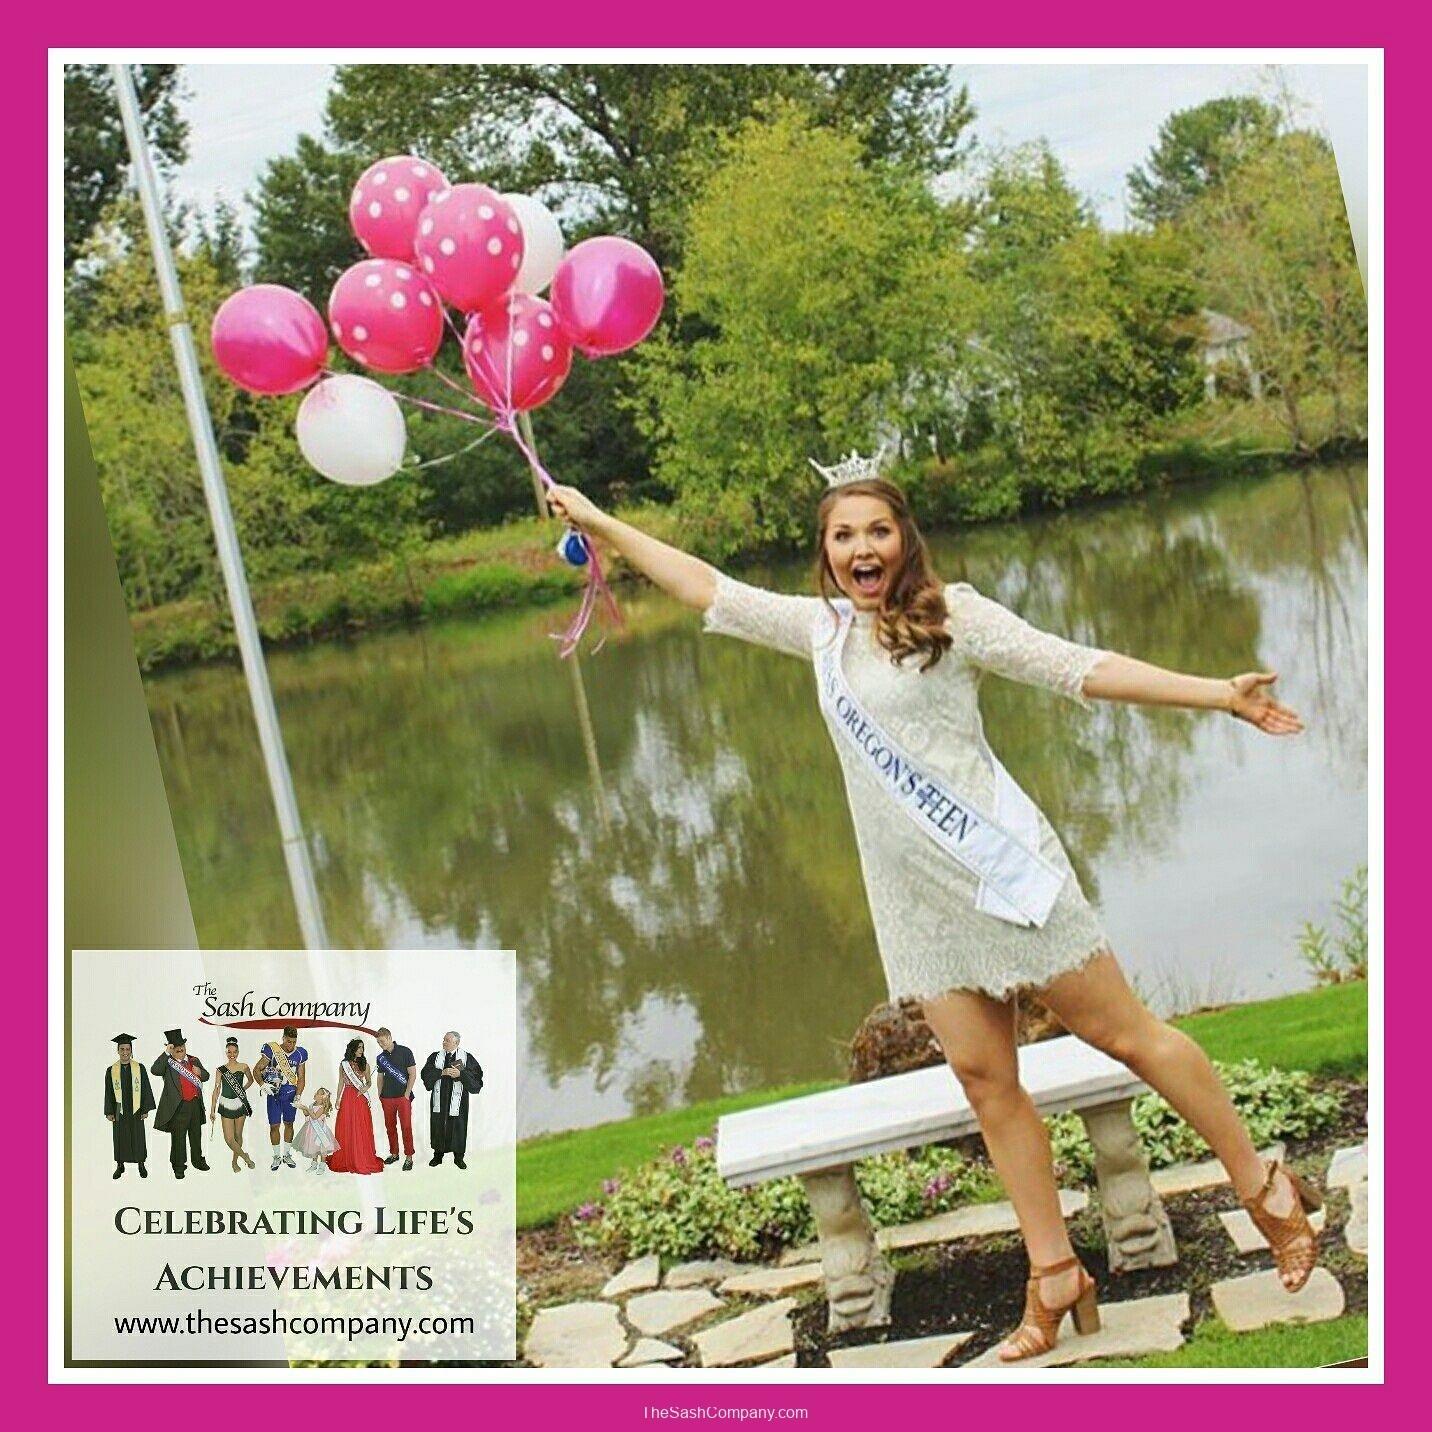 MAOTeen Miss Oregon with Balloons  